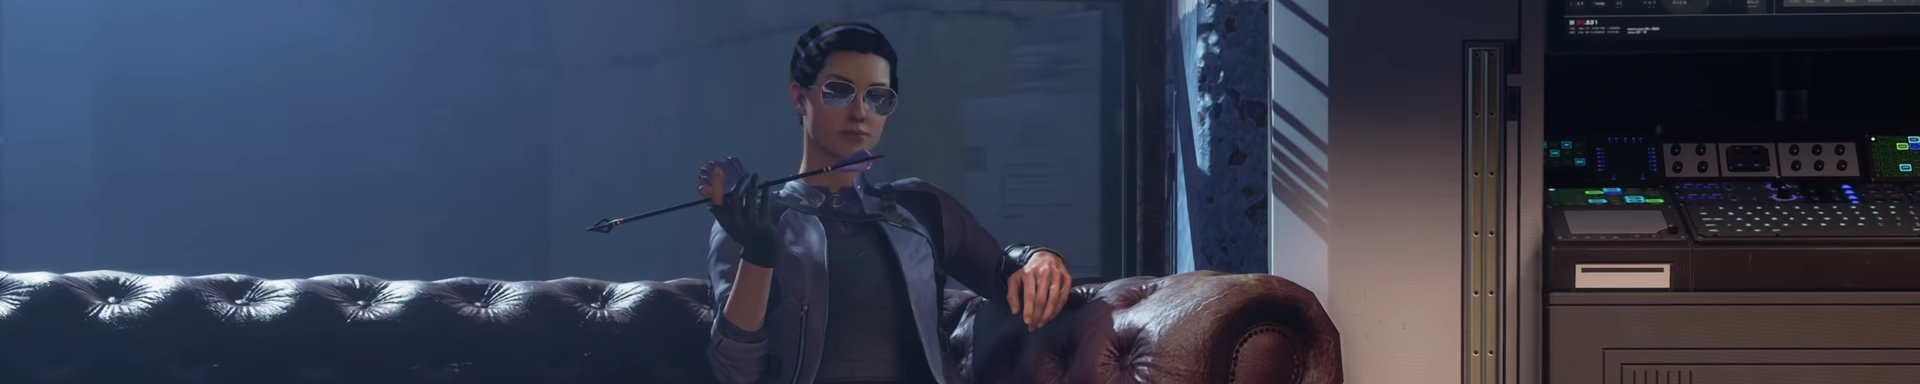 Marvel's Avengers PS5 and Xbox Series X Kate Bishop DLC slice 2